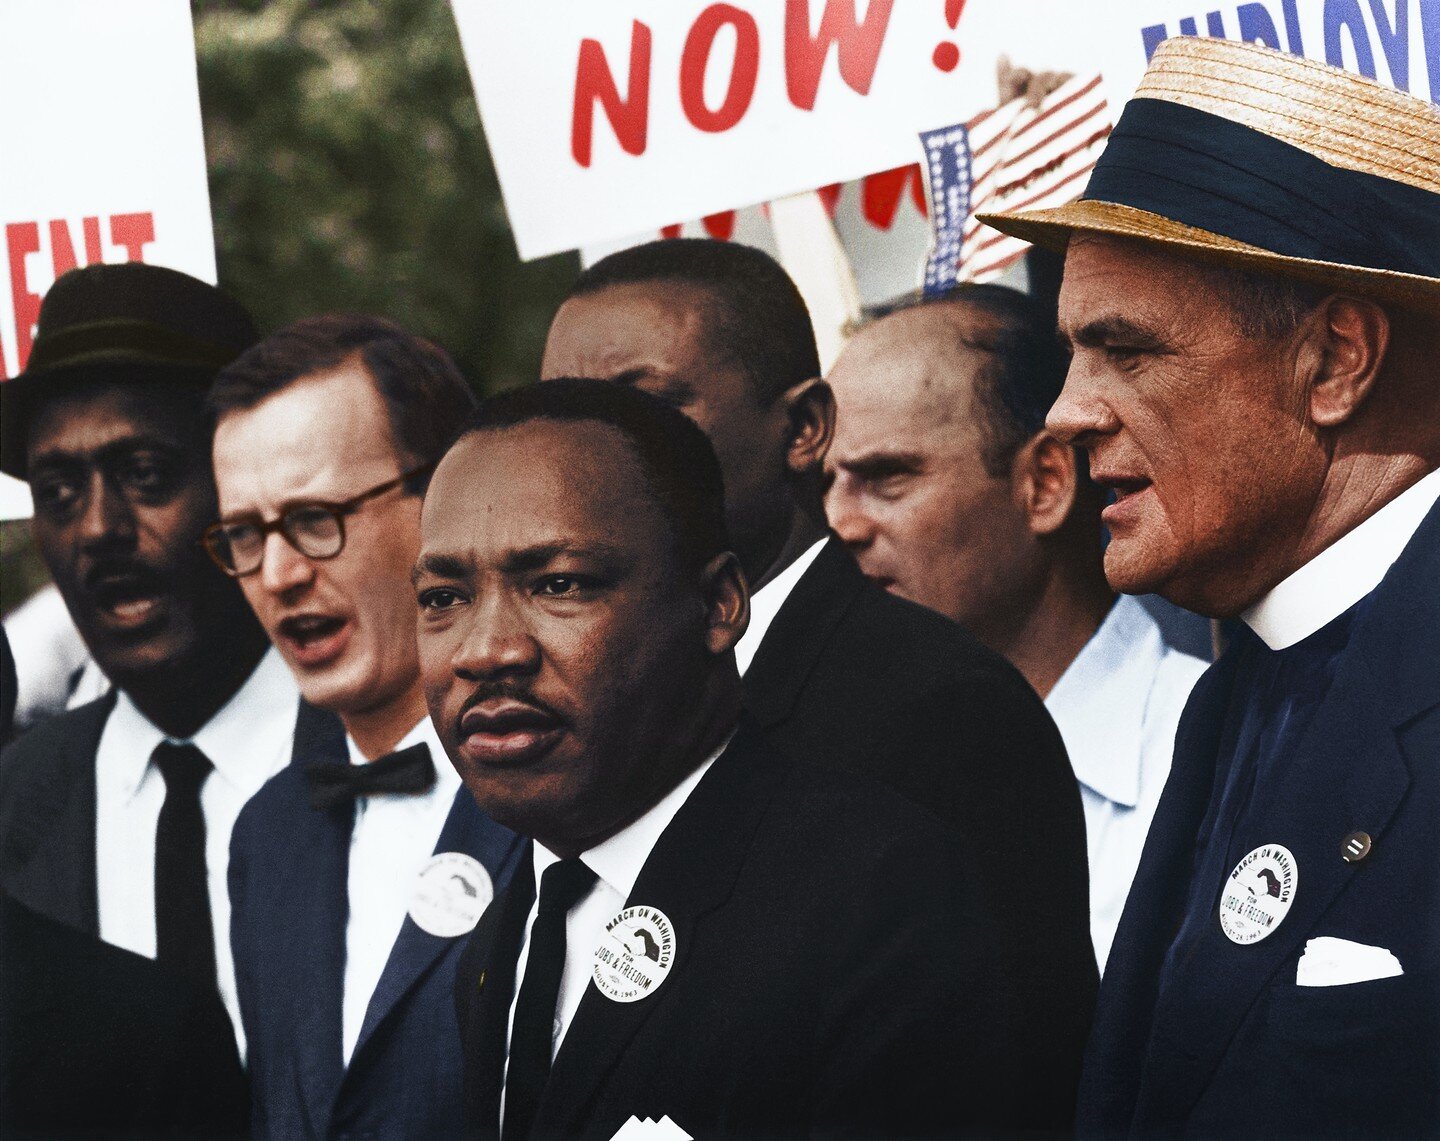 &ldquo;The time is always right to do what is right.&rdquo; &mdash; Dr. Martin Luther King Jr. 

Today we observe the journey of Dr. Martin Luther King Jr. and reflect on the work that still needs to be done for racial equality. 

We ask you to join 